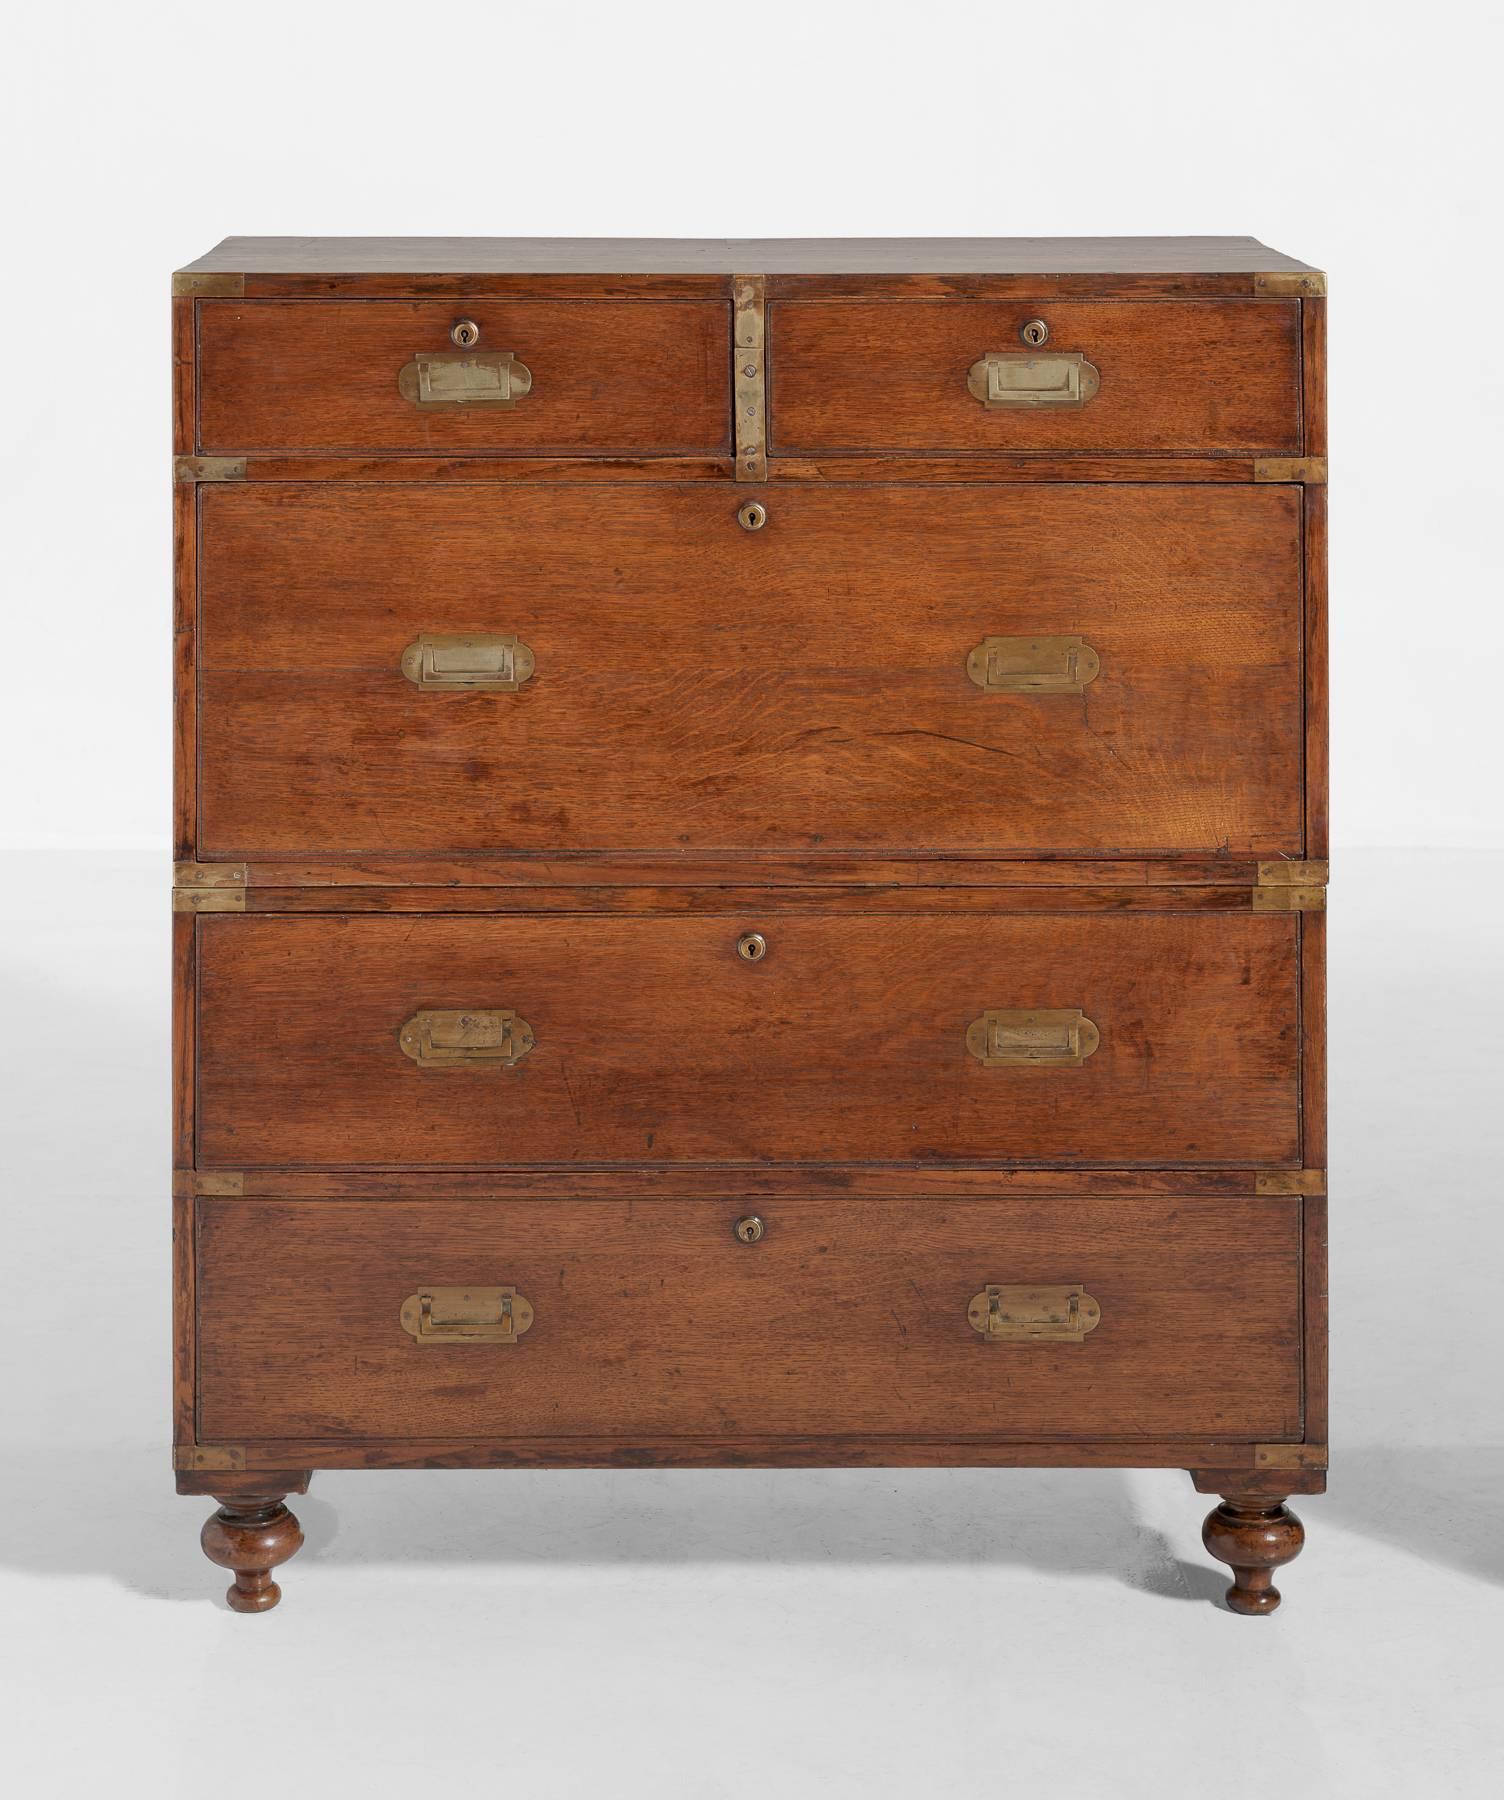 Campaign chest of drawers, England, circa 1910.

Unique oak chest with original brass mounts and hardware.